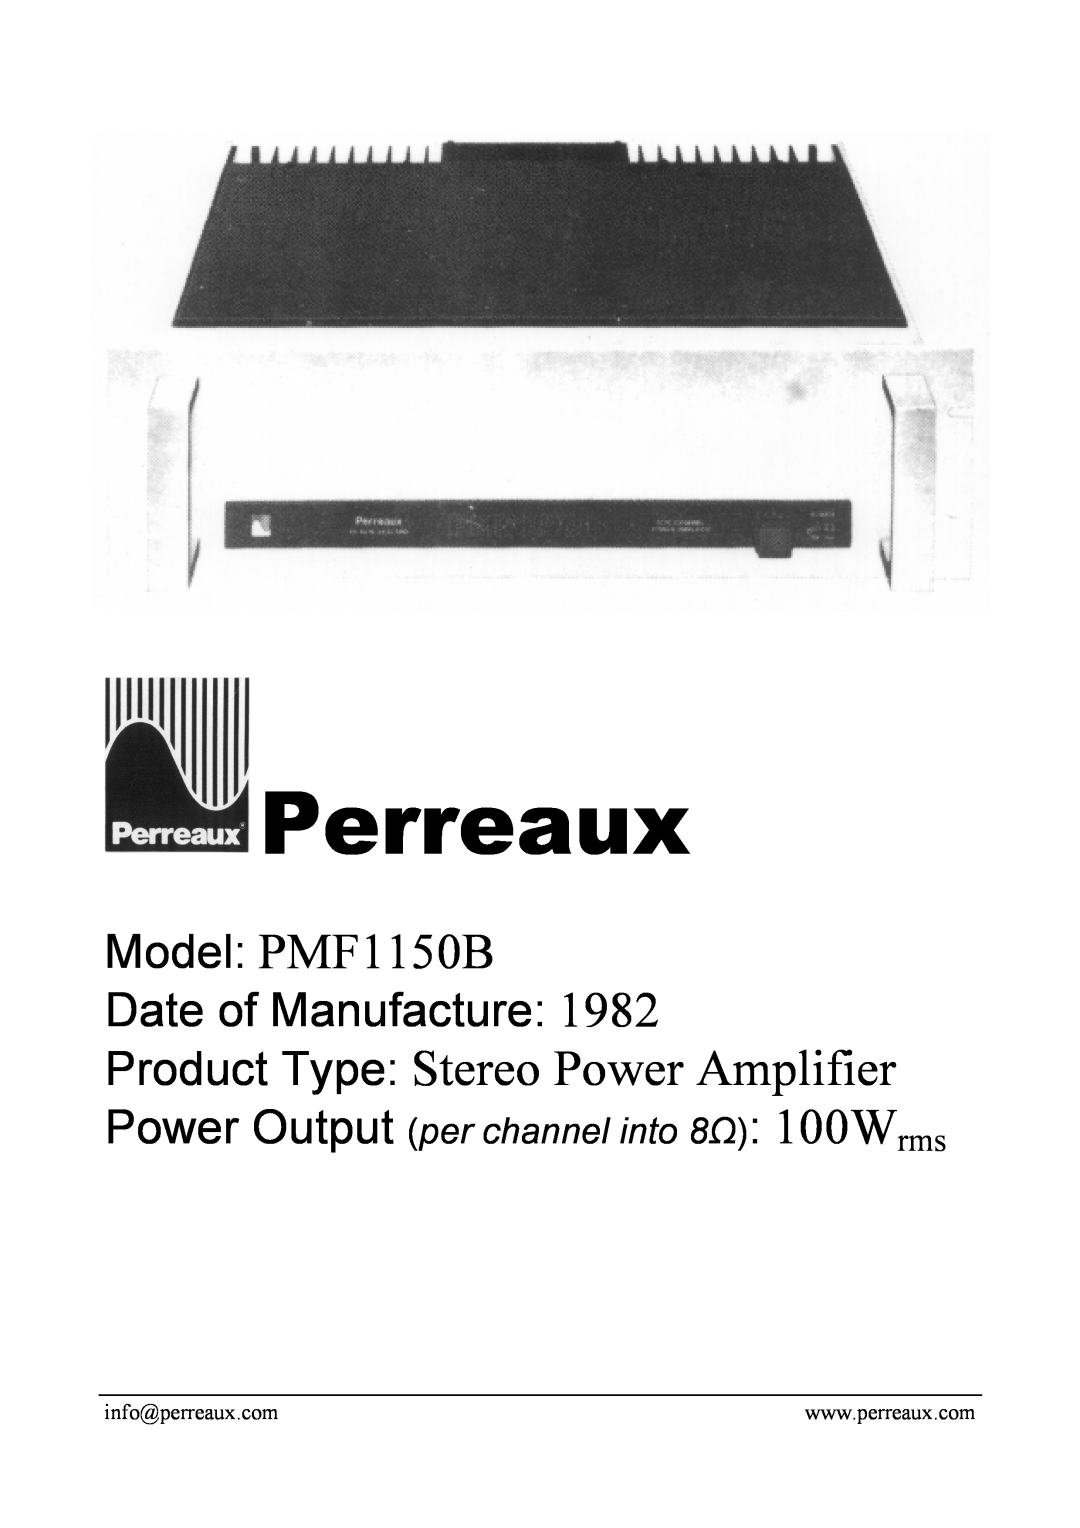 Perreaux manual Perreaux, Model PMF1150B, Product Type Stereo Power Amplifier, Date of Manufacture 